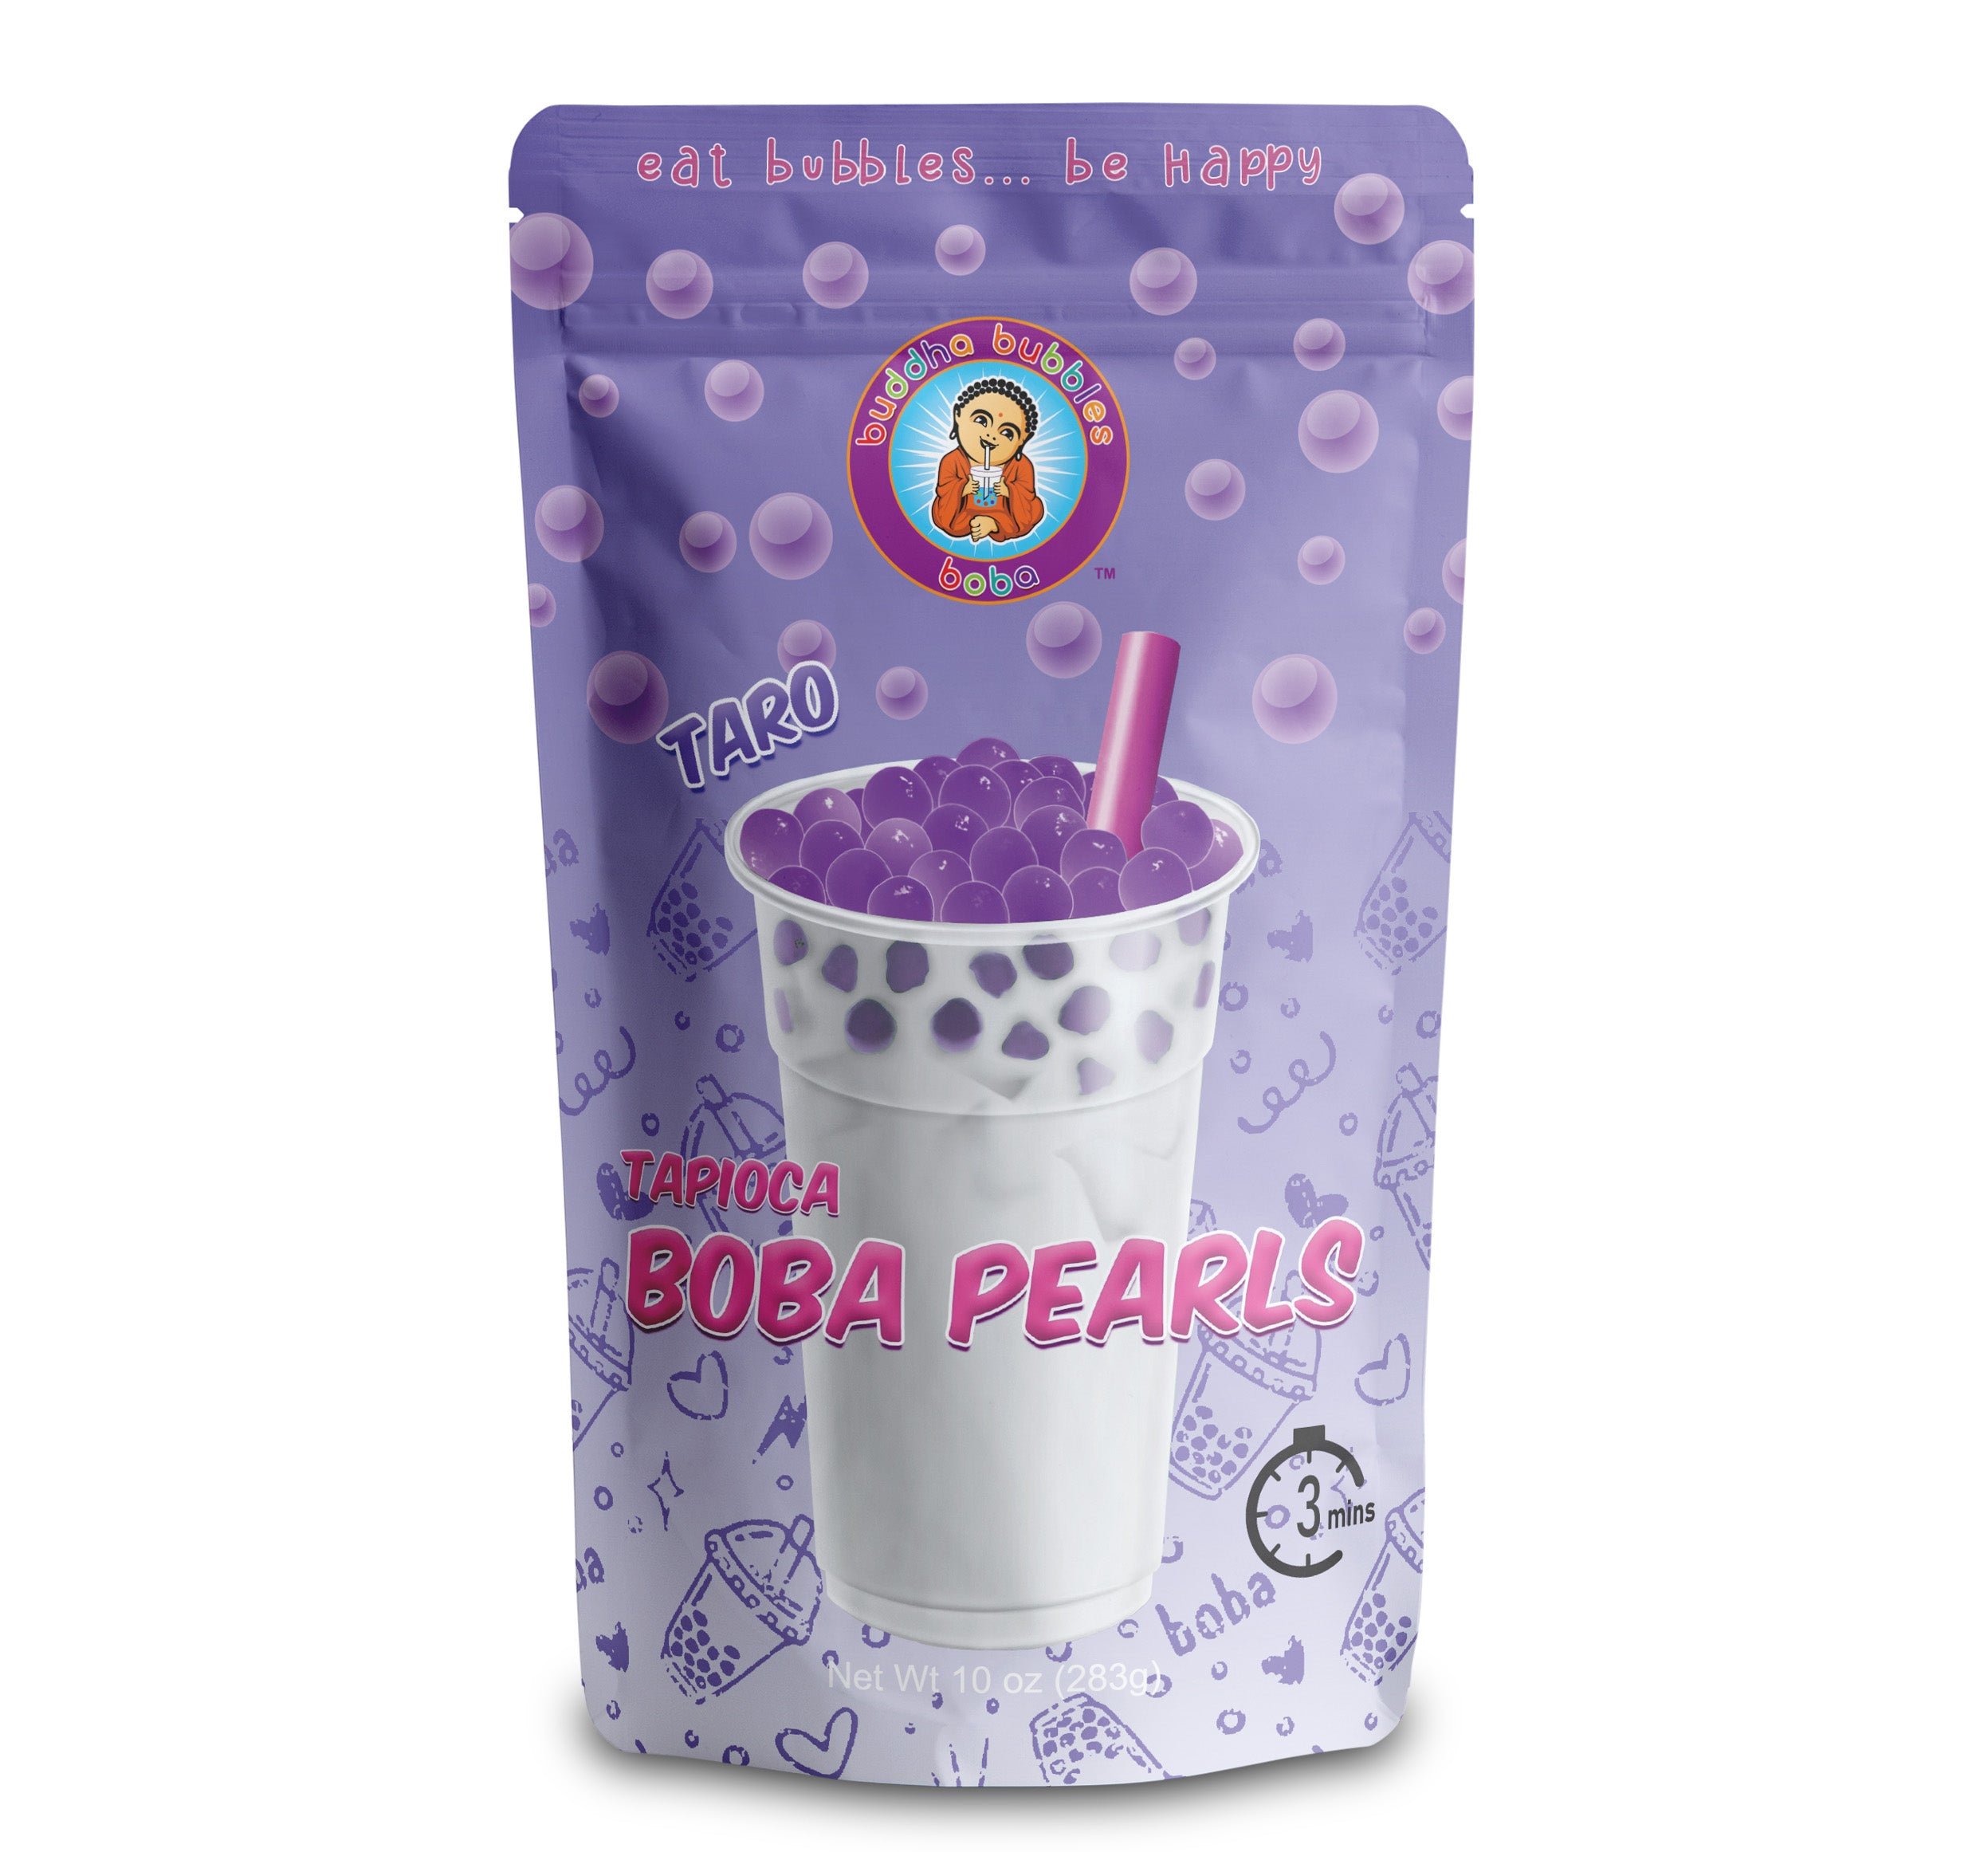 Best seller! This creamy taro candle captures the distinct nutty flavors of  taro boba & notes of condensed milk. Light this boba candle & it will leave  you wanting more. – AsianBobaGirl